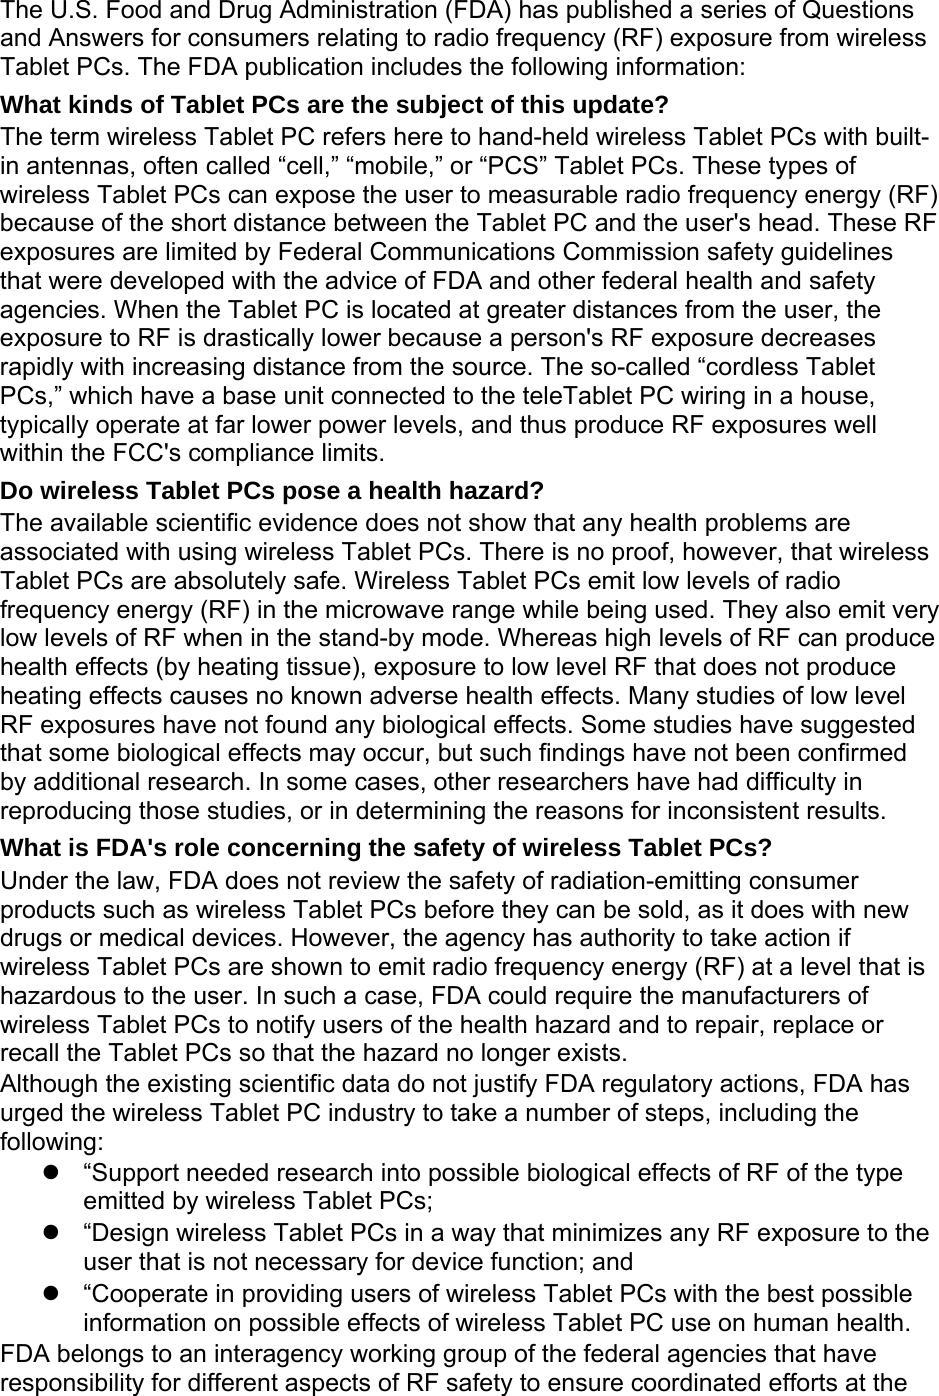 The U.S. Food and Drug Administration (FDA) has published a series of Questions and Answers for consumers relating to radio frequency (RF) exposure from wireless Tablet PCs. The FDA publication includes the following information: What kinds of Tablet PCs are the subject of this update? The term wireless Tablet PC refers here to hand-held wireless Tablet PCs with built-in antennas, often called “cell,” “mobile,” or “PCS” Tablet PCs. These types of wireless Tablet PCs can expose the user to measurable radio frequency energy (RF) because of the short distance between the Tablet PC and the user&apos;s head. These RF exposures are limited by Federal Communications Commission safety guidelines that were developed with the advice of FDA and other federal health and safety agencies. When the Tablet PC is located at greater distances from the user, the exposure to RF is drastically lower because a person&apos;s RF exposure decreases rapidly with increasing distance from the source. The so-called “cordless Tablet PCs,” which have a base unit connected to the teleTablet PC wiring in a house, typically operate at far lower power levels, and thus produce RF exposures well within the FCC&apos;s compliance limits. Do wireless Tablet PCs pose a health hazard? The available scientific evidence does not show that any health problems are associated with using wireless Tablet PCs. There is no proof, however, that wireless Tablet PCs are absolutely safe. Wireless Tablet PCs emit low levels of radio frequency energy (RF) in the microwave range while being used. They also emit very low levels of RF when in the stand-by mode. Whereas high levels of RF can produce health effects (by heating tissue), exposure to low level RF that does not produce heating effects causes no known adverse health effects. Many studies of low level RF exposures have not found any biological effects. Some studies have suggested that some biological effects may occur, but such findings have not been confirmed by additional research. In some cases, other researchers have had difficulty in reproducing those studies, or in determining the reasons for inconsistent results. What is FDA&apos;s role concerning the safety of wireless Tablet PCs? Under the law, FDA does not review the safety of radiation-emitting consumer products such as wireless Tablet PCs before they can be sold, as it does with new drugs or medical devices. However, the agency has authority to take action if wireless Tablet PCs are shown to emit radio frequency energy (RF) at a level that is hazardous to the user. In such a case, FDA could require the manufacturers of wireless Tablet PCs to notify users of the health hazard and to repair, replace or recall the Tablet PCs so that the hazard no longer exists. Although the existing scientific data do not justify FDA regulatory actions, FDA has urged the wireless Tablet PC industry to take a number of steps, including the following:   “Support needed research into possible biological effects of RF of the type emitted by wireless Tablet PCs;   “Design wireless Tablet PCs in a way that minimizes any RF exposure to the user that is not necessary for device function; and   “Cooperate in providing users of wireless Tablet PCs with the best possible information on possible effects of wireless Tablet PC use on human health. FDA belongs to an interagency working group of the federal agencies that have responsibility for different aspects of RF safety to ensure coordinated efforts at the 